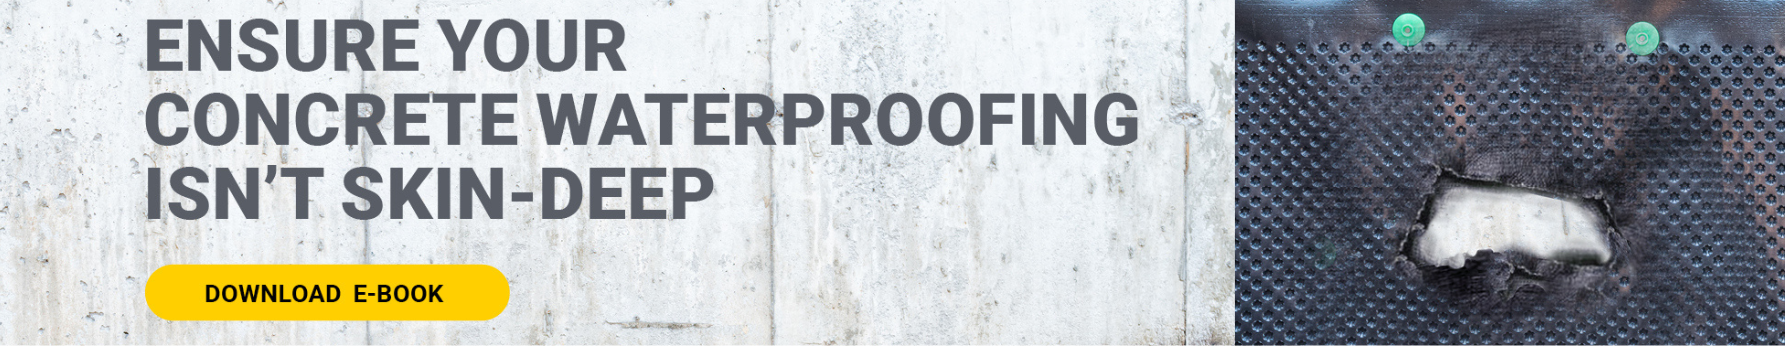 Ensure your concrete waterproofing isn't skin-deep. Download the e-book today.